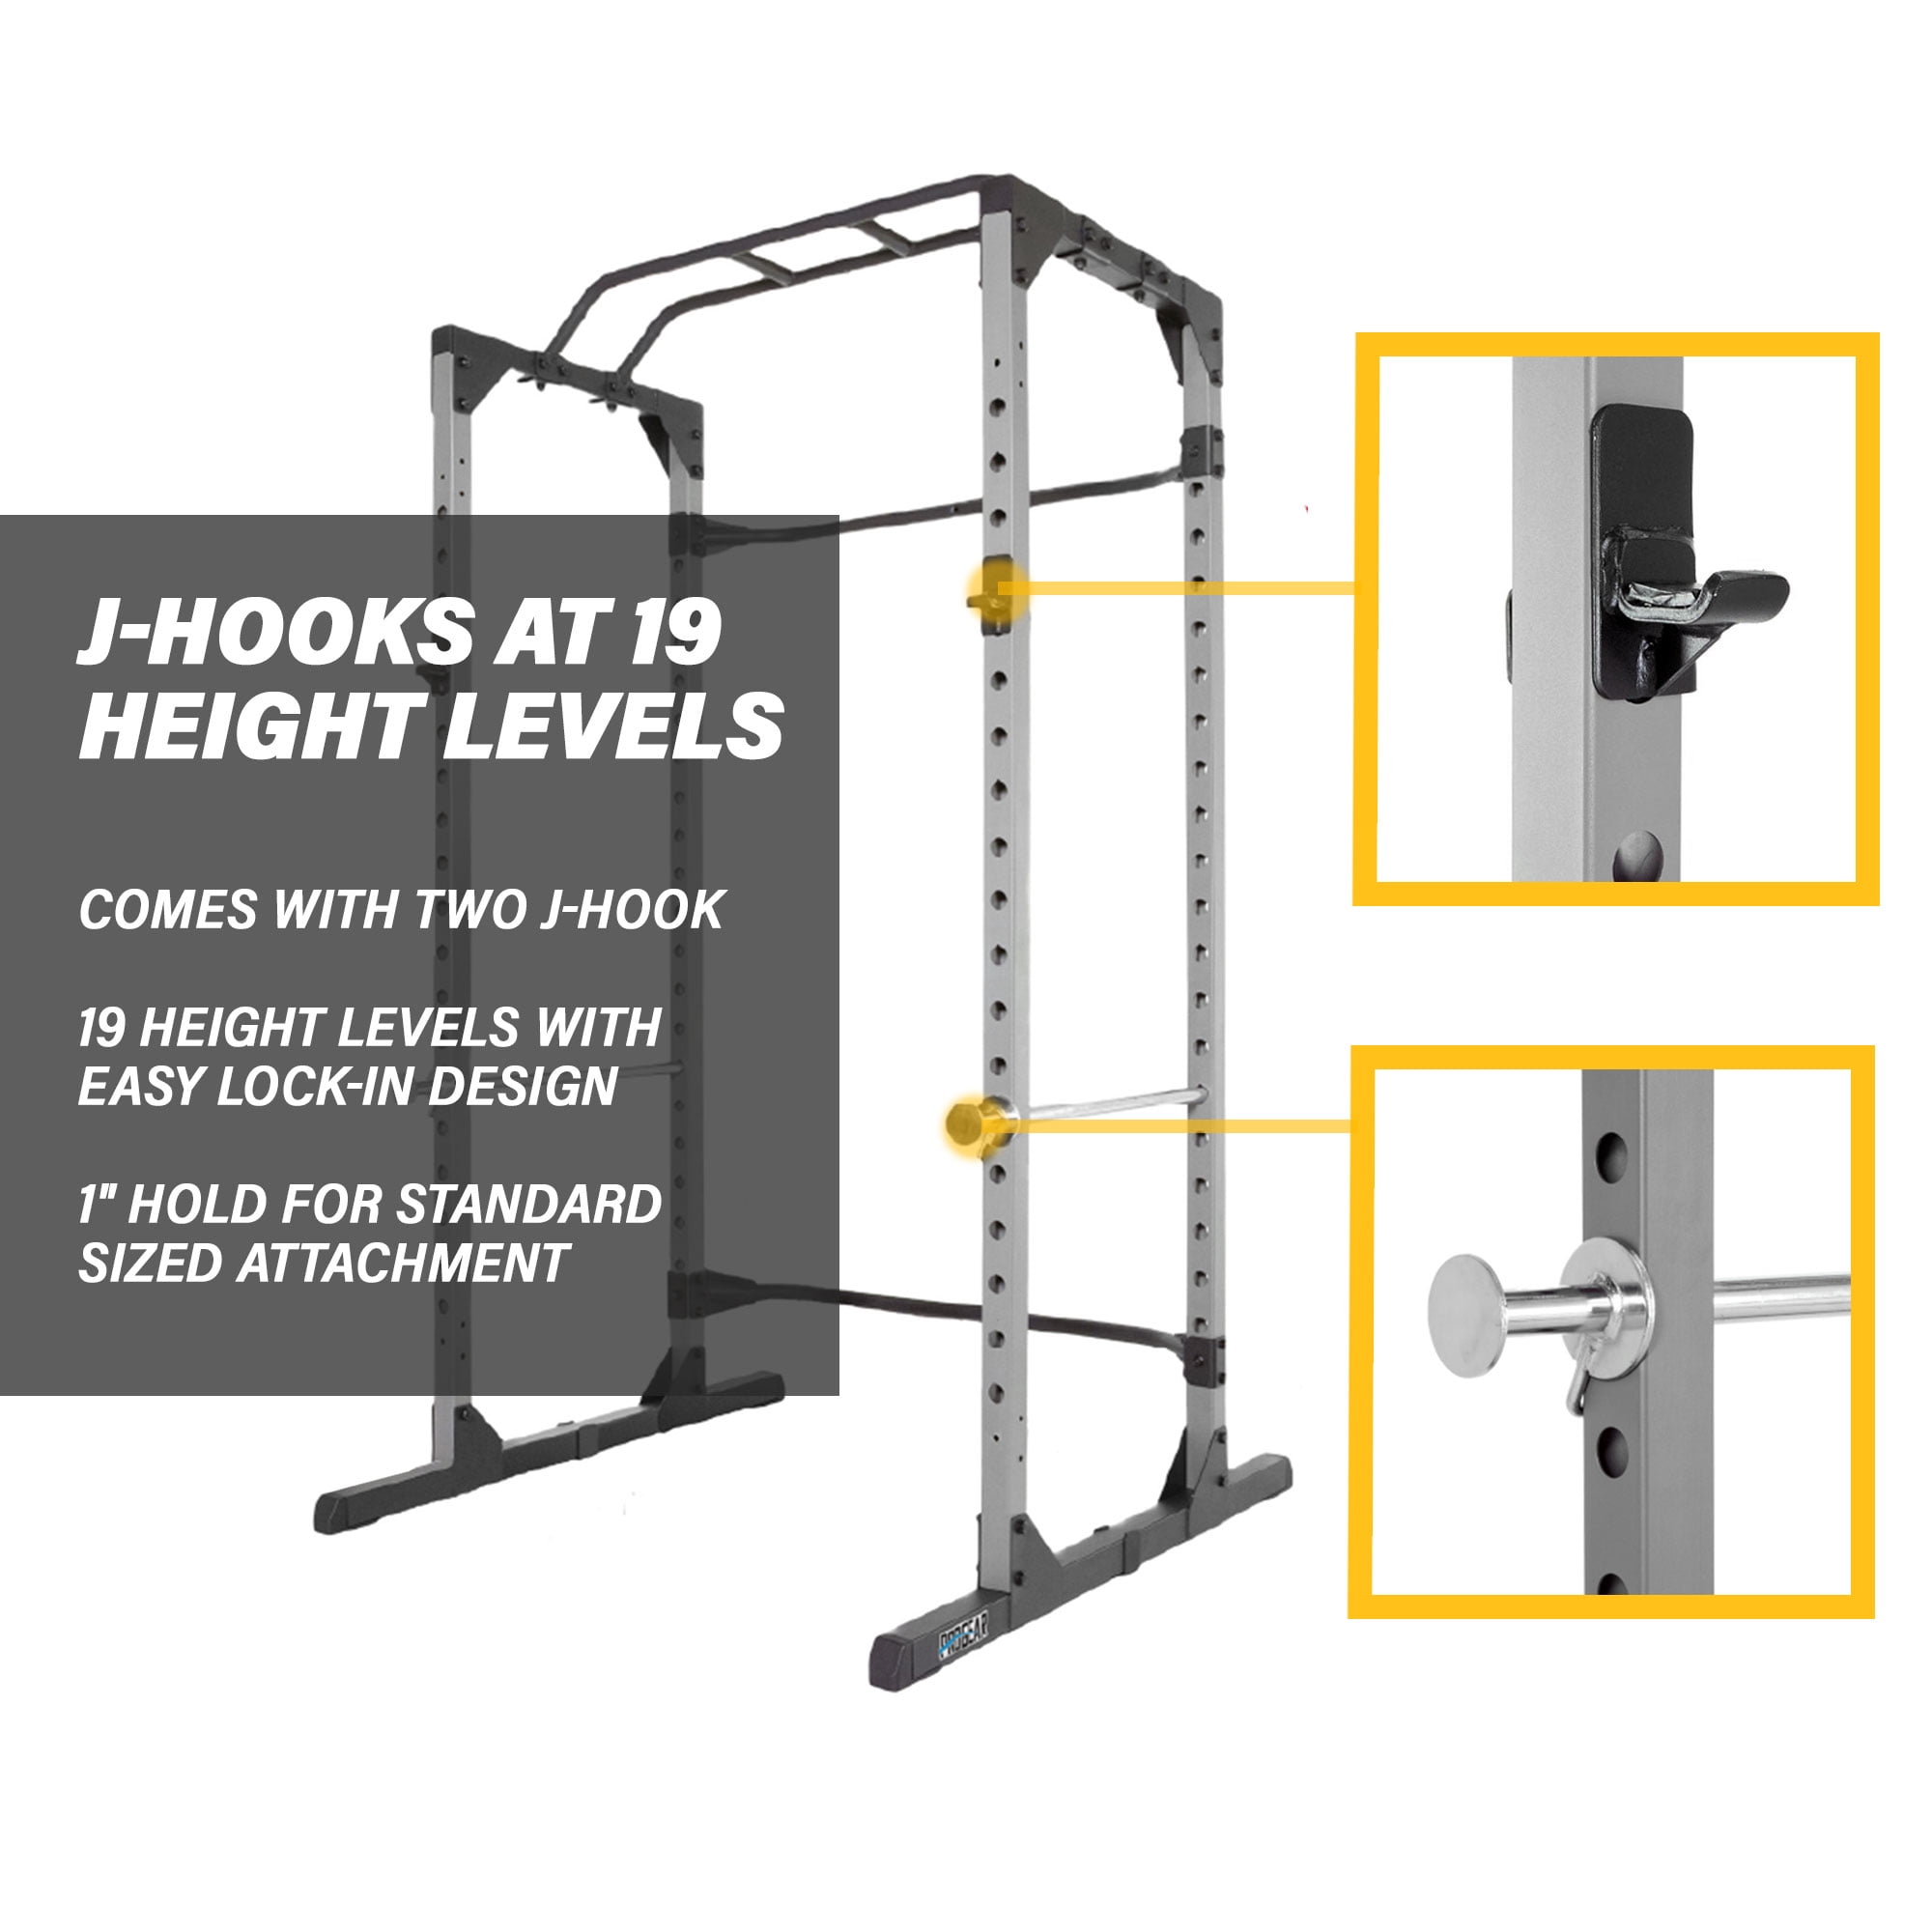 PROGEAR 310 Olympic Lat Pull Down and Low Row Cable Attachment for Progear 1600 Ultra Strength 800lb Weight Capacity Squat Stand Power Rack Cage with Lock-in J-Hooks